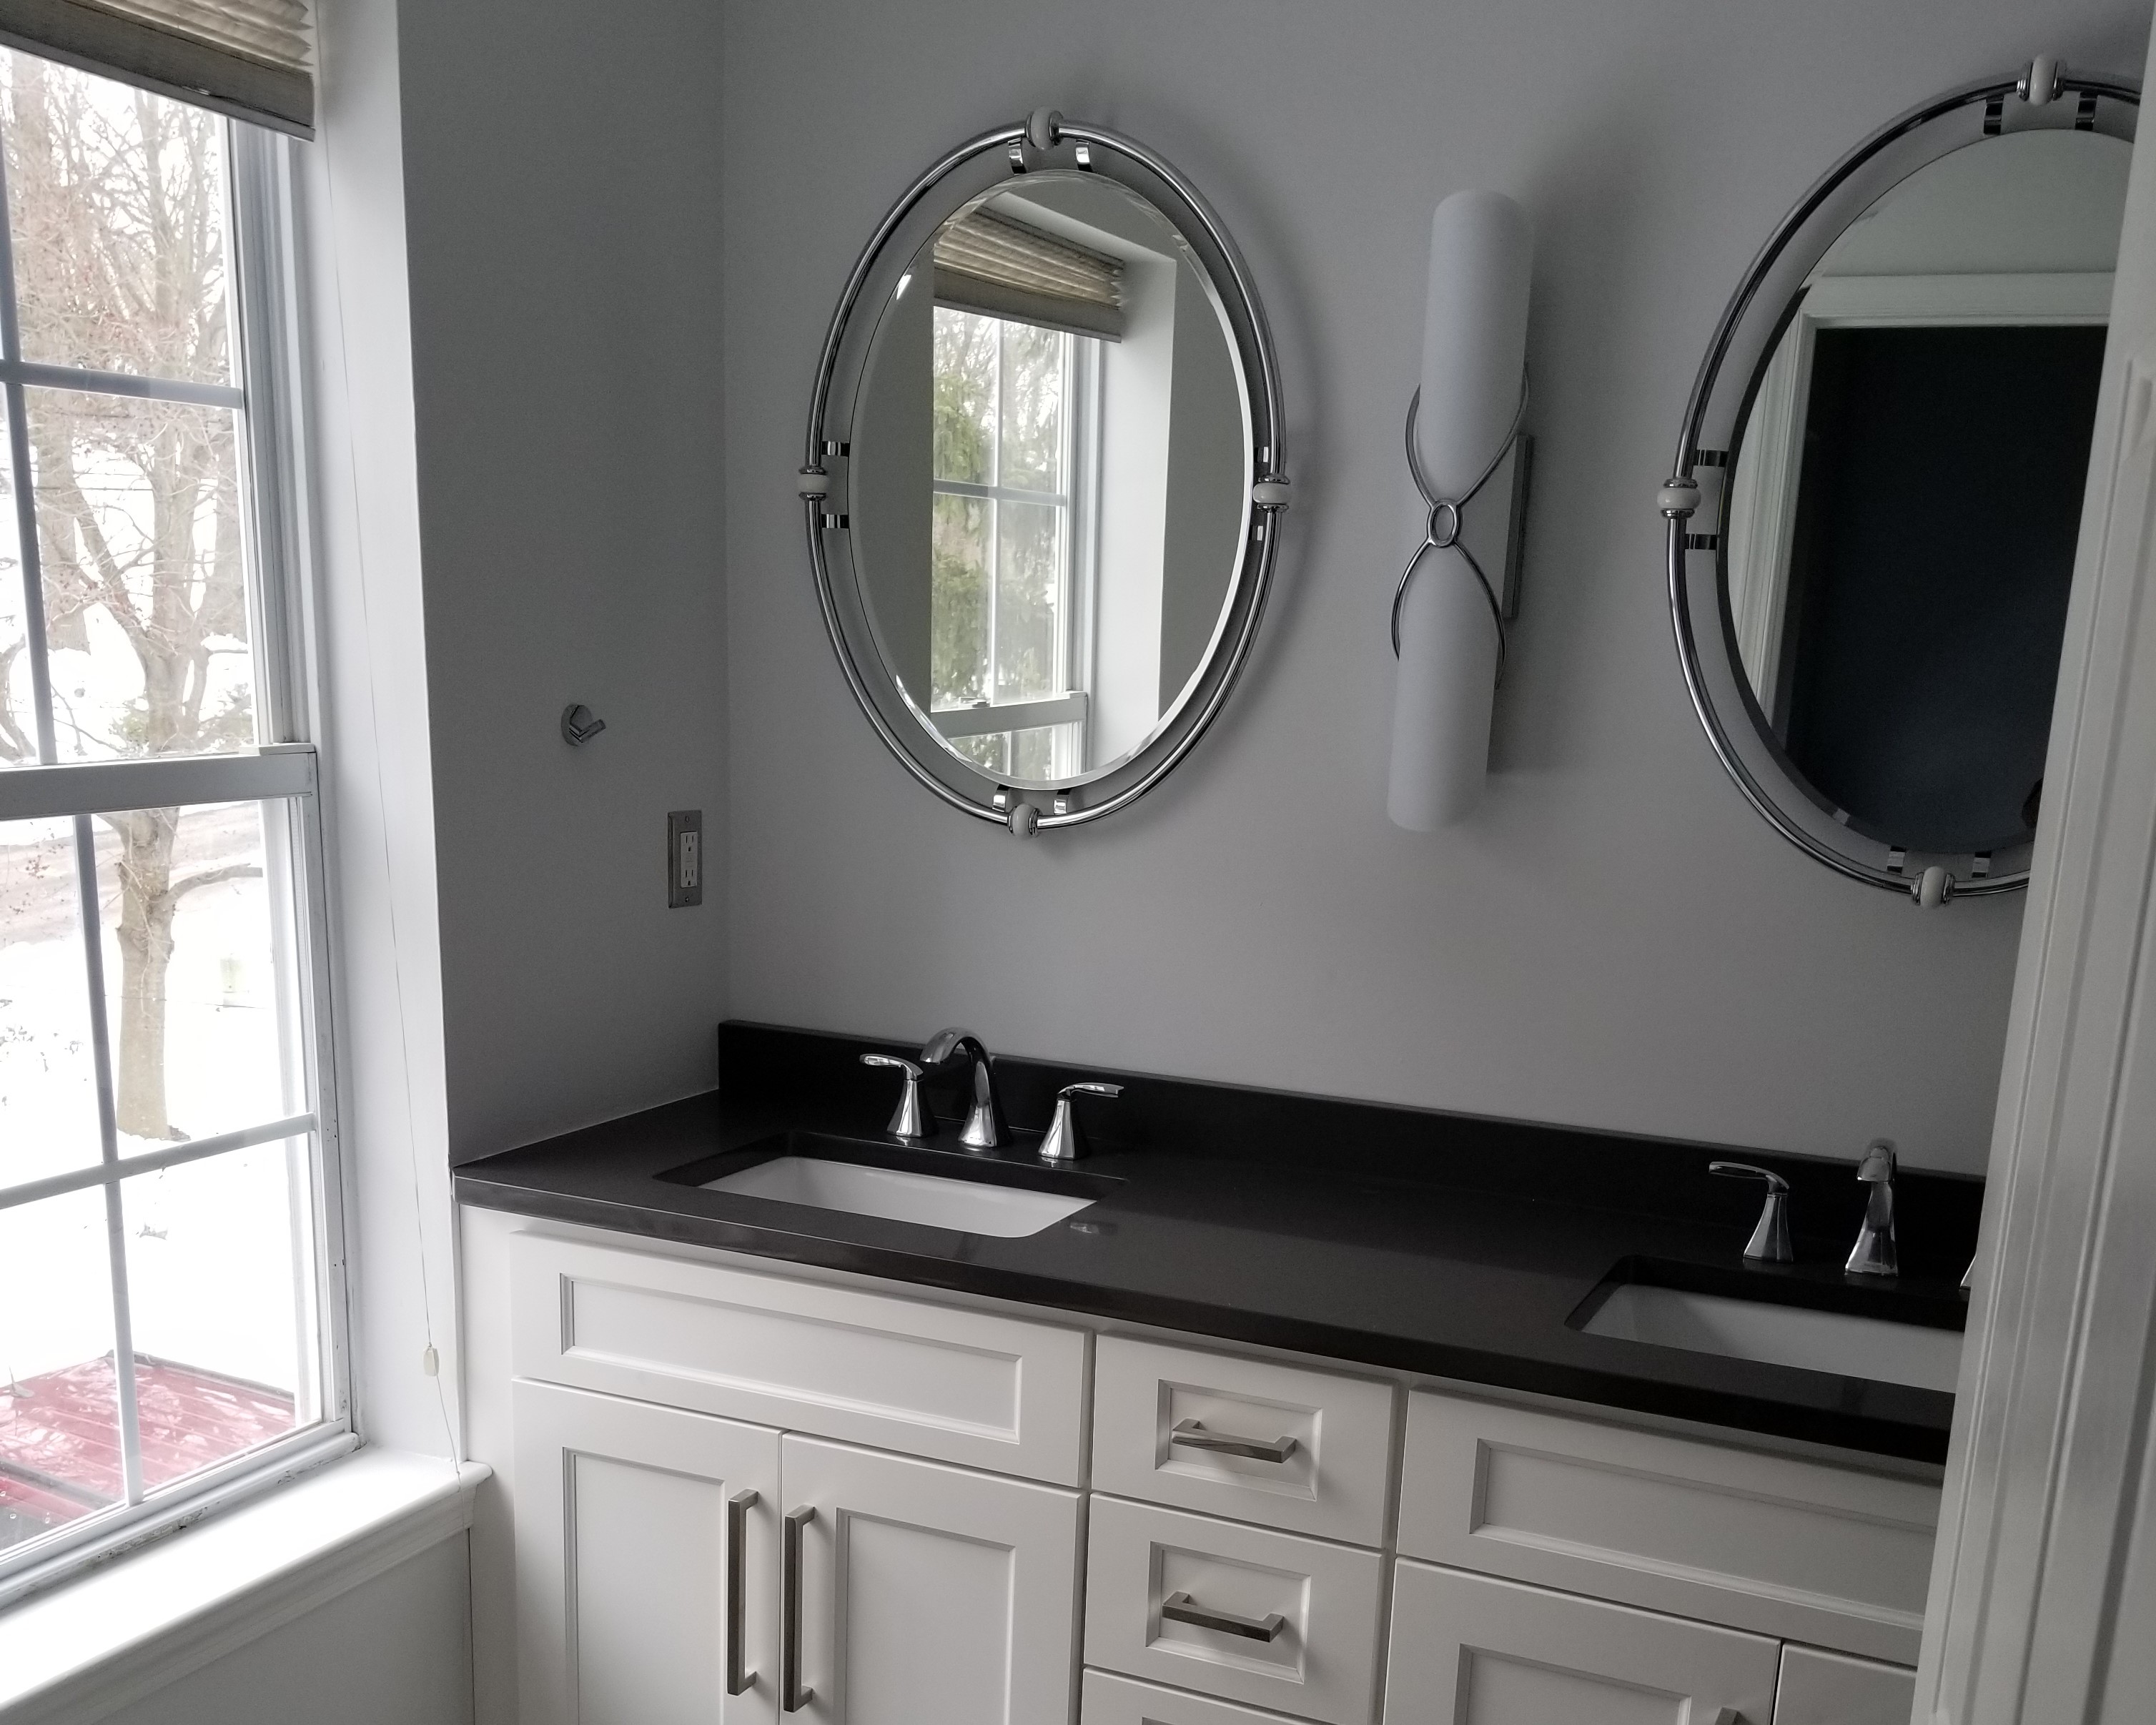 a master bath remodel in plymouth meeting, pa 19462 renovated by deluca construction